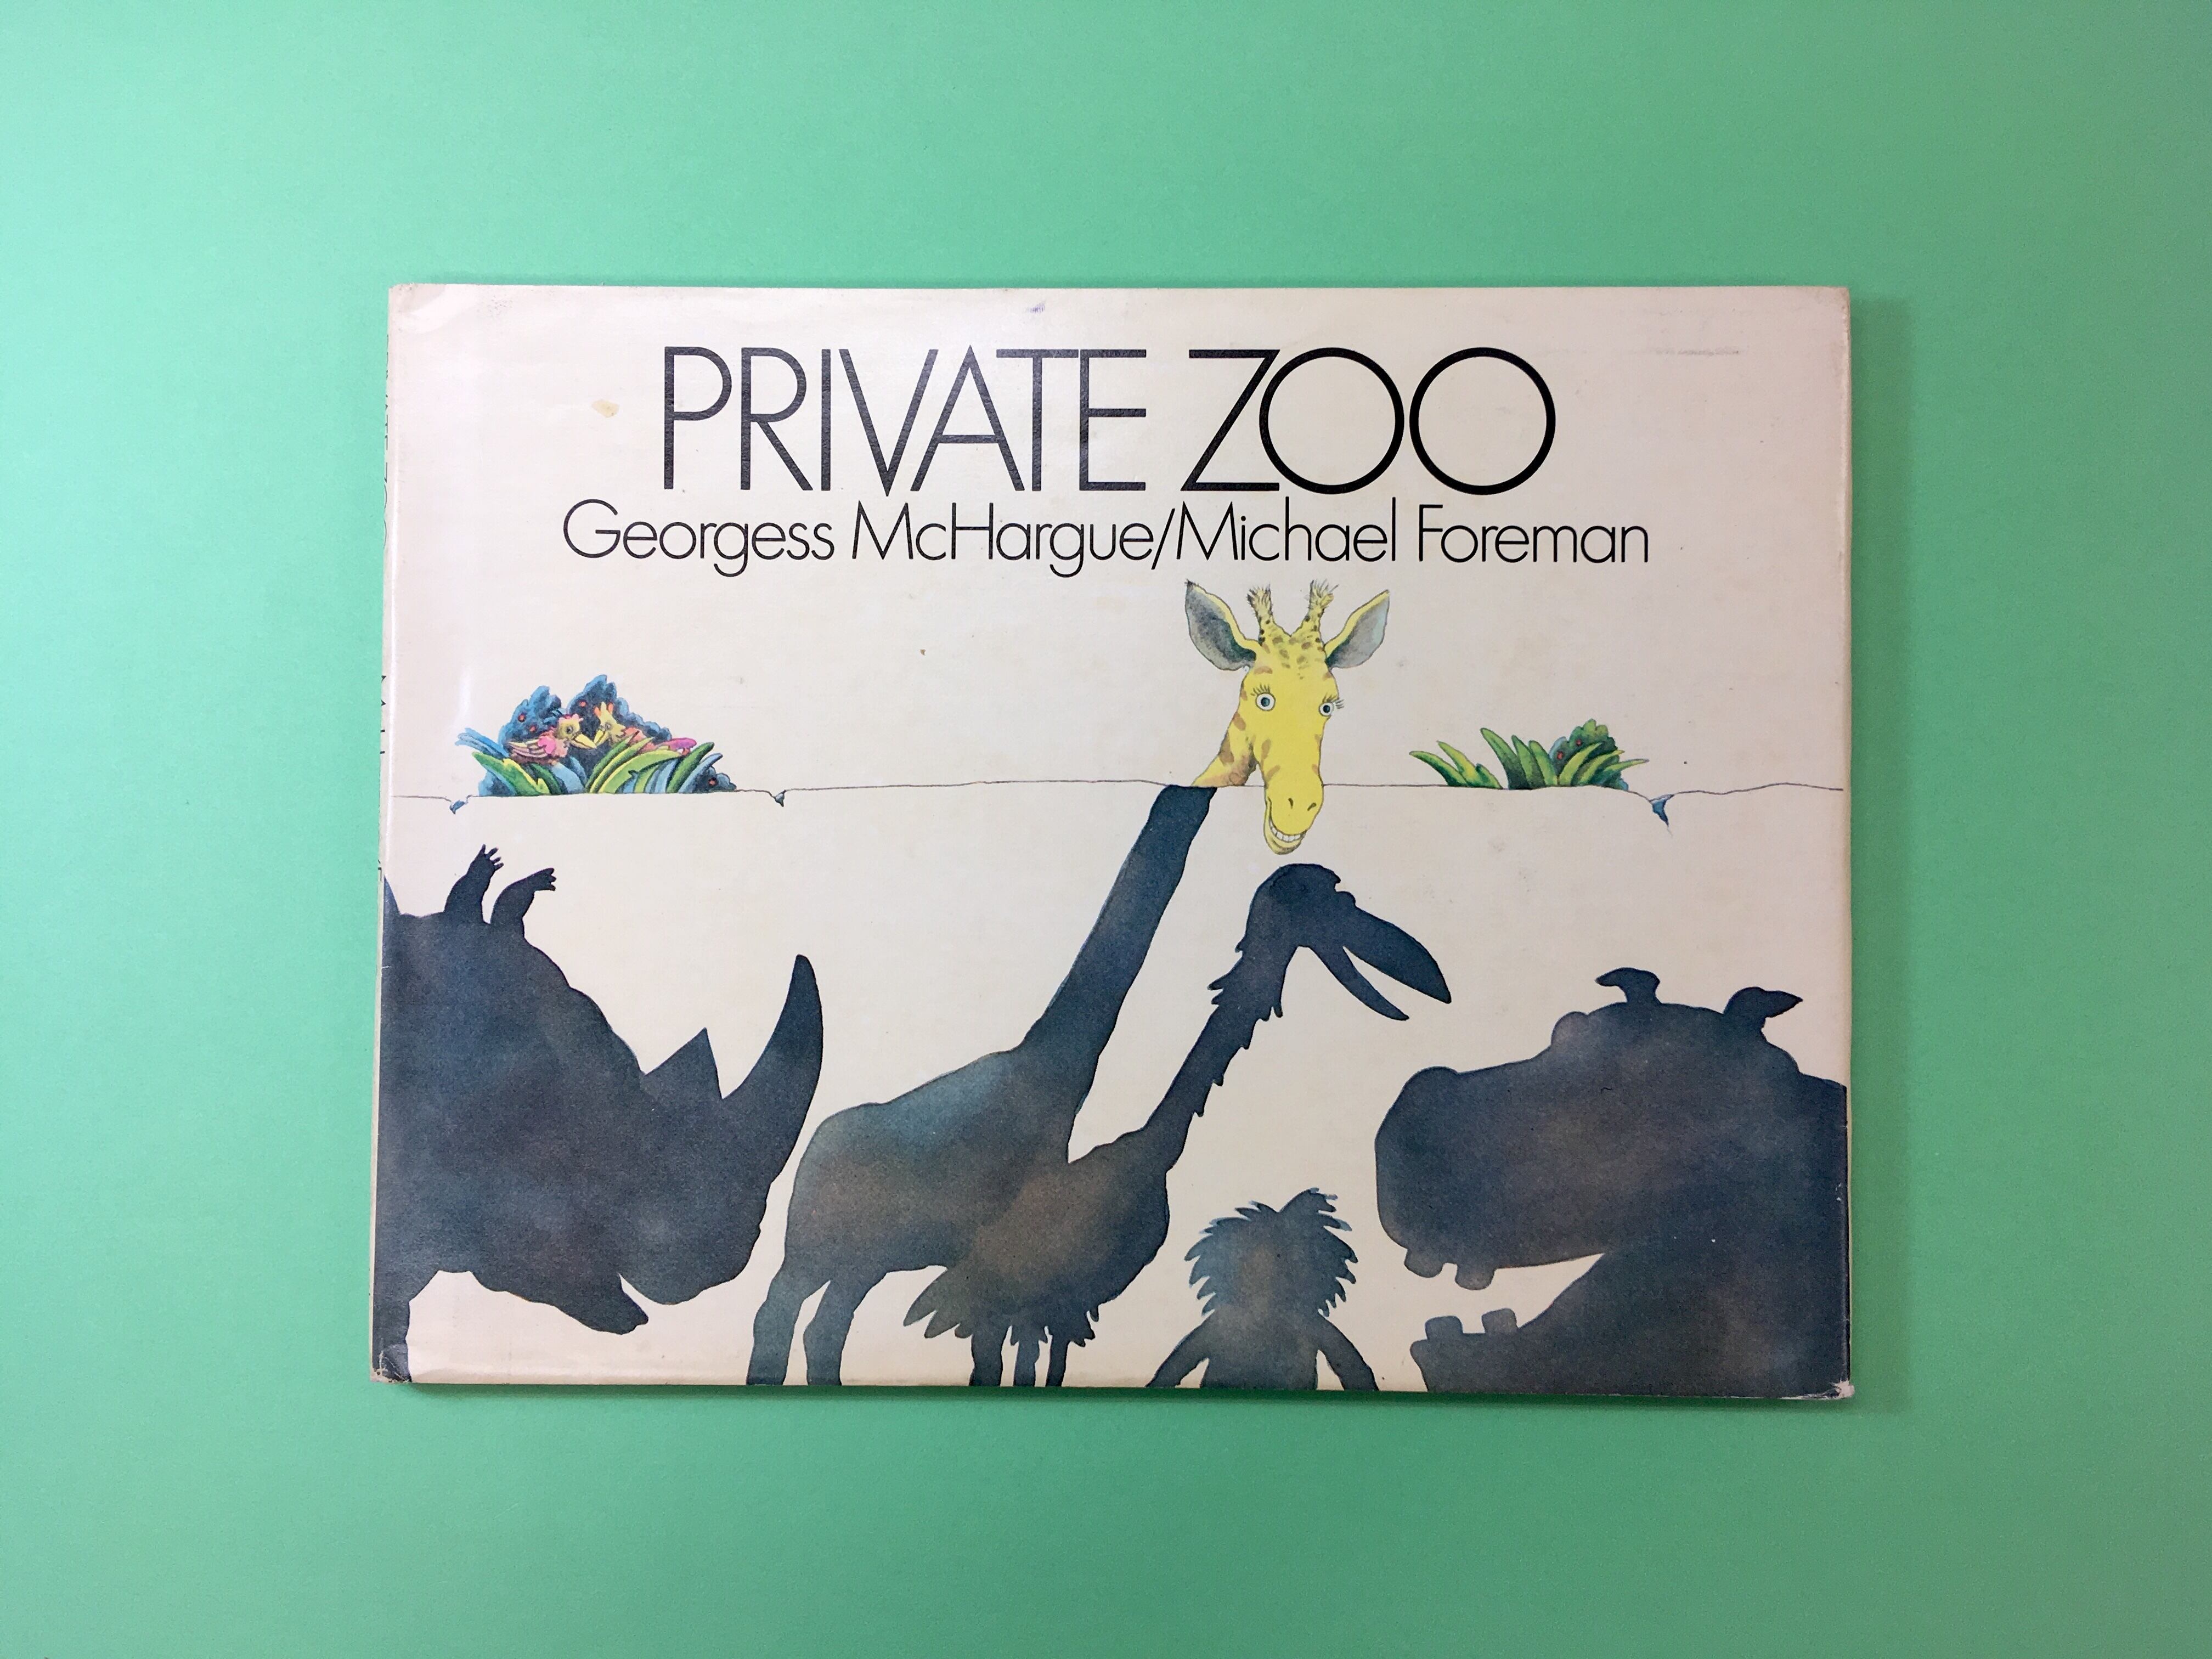 PRIVATE　shop　ZOO｜Georgess　コ本や　McHargue/Michael　Foreman　picture　book